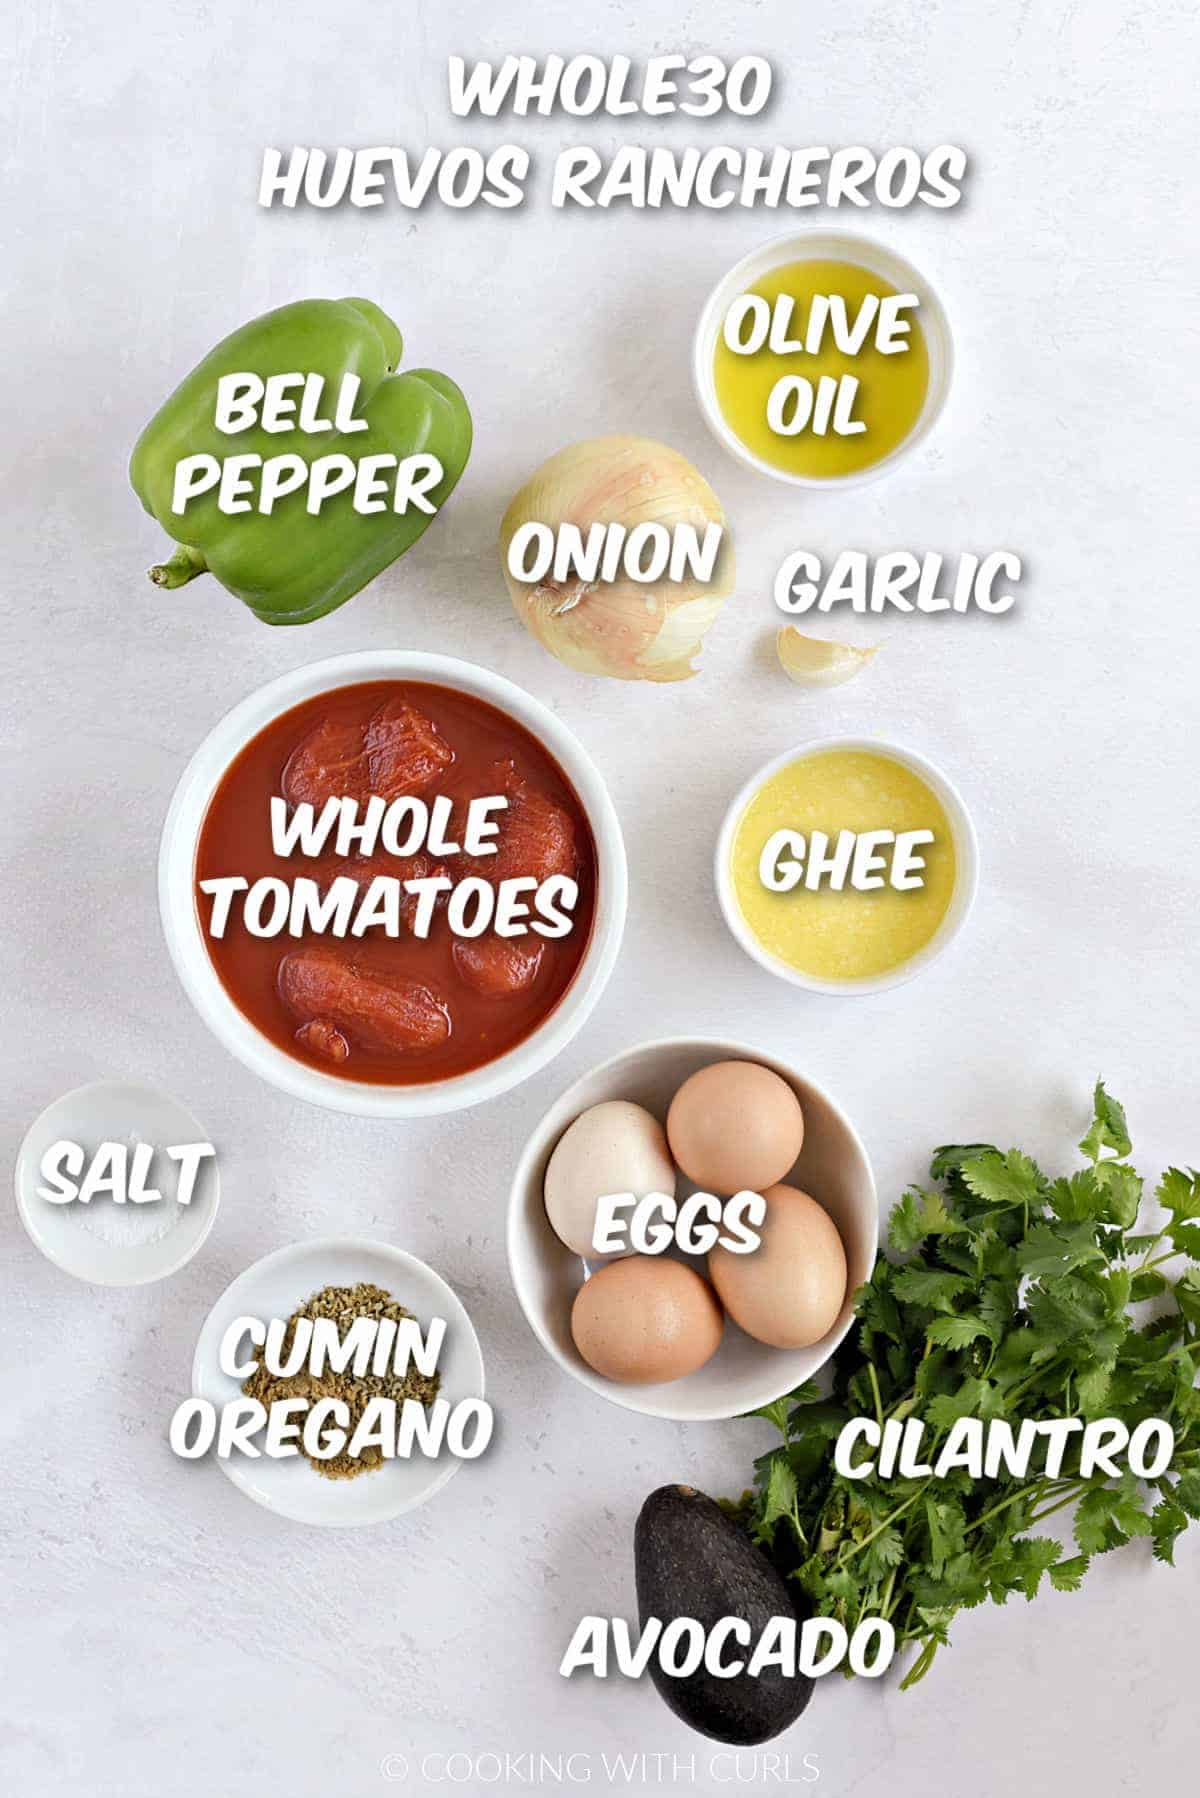 All of the ingredients to make whole30 huevos rancheros.